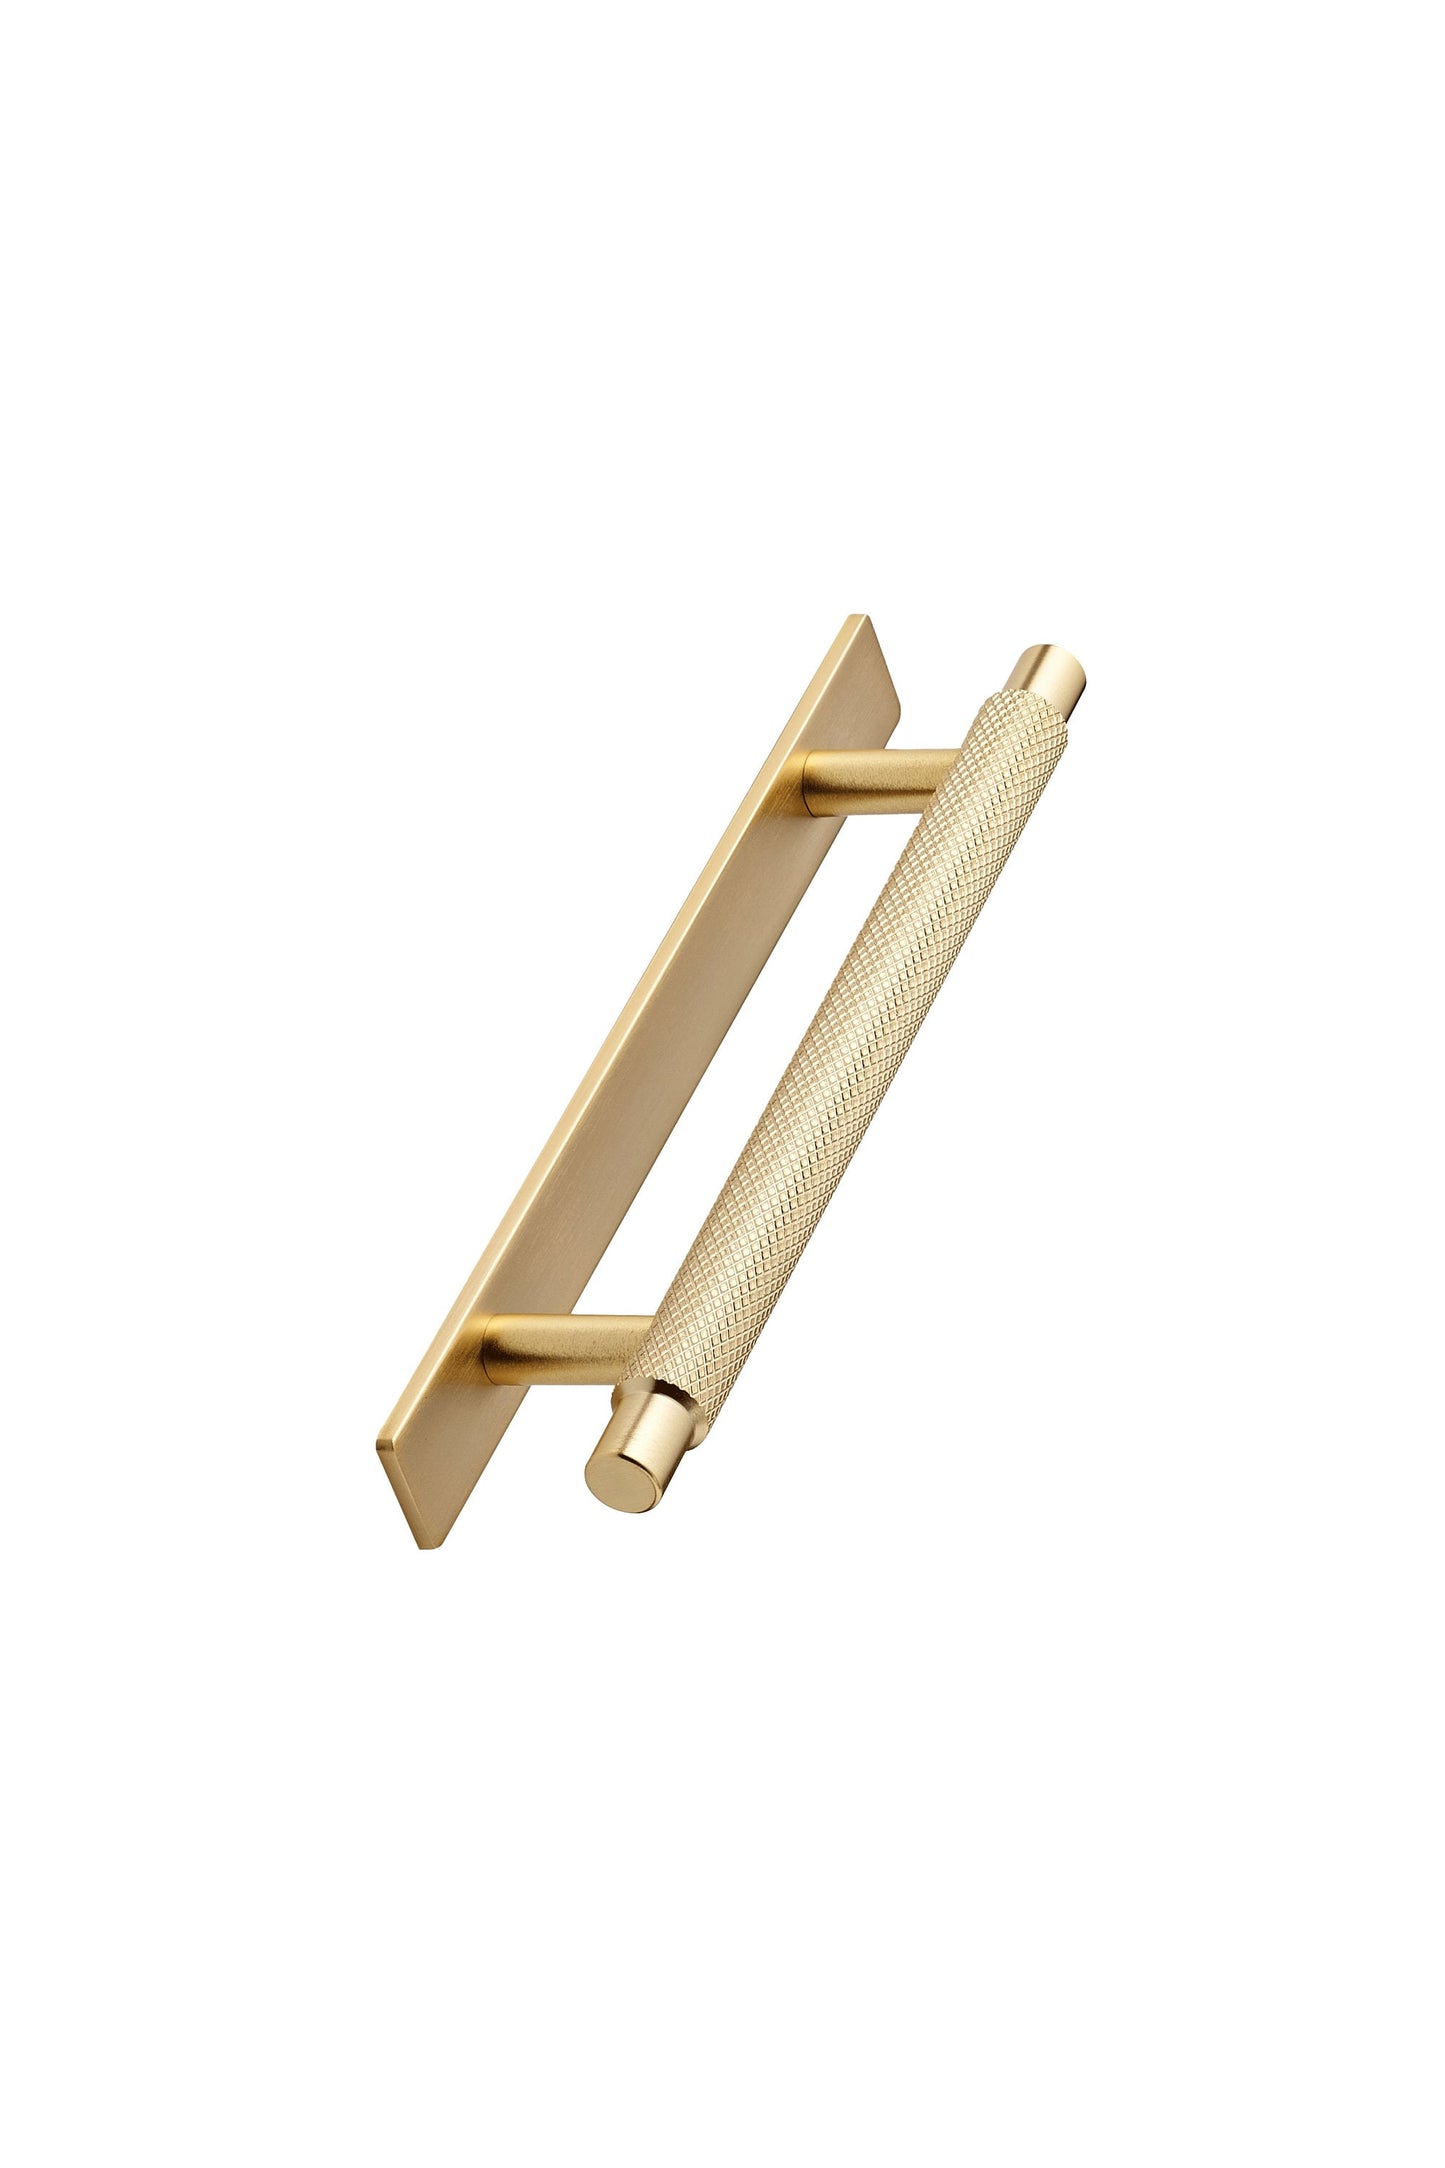 Furnipart Manor Knurled Handles & Knobs Gold